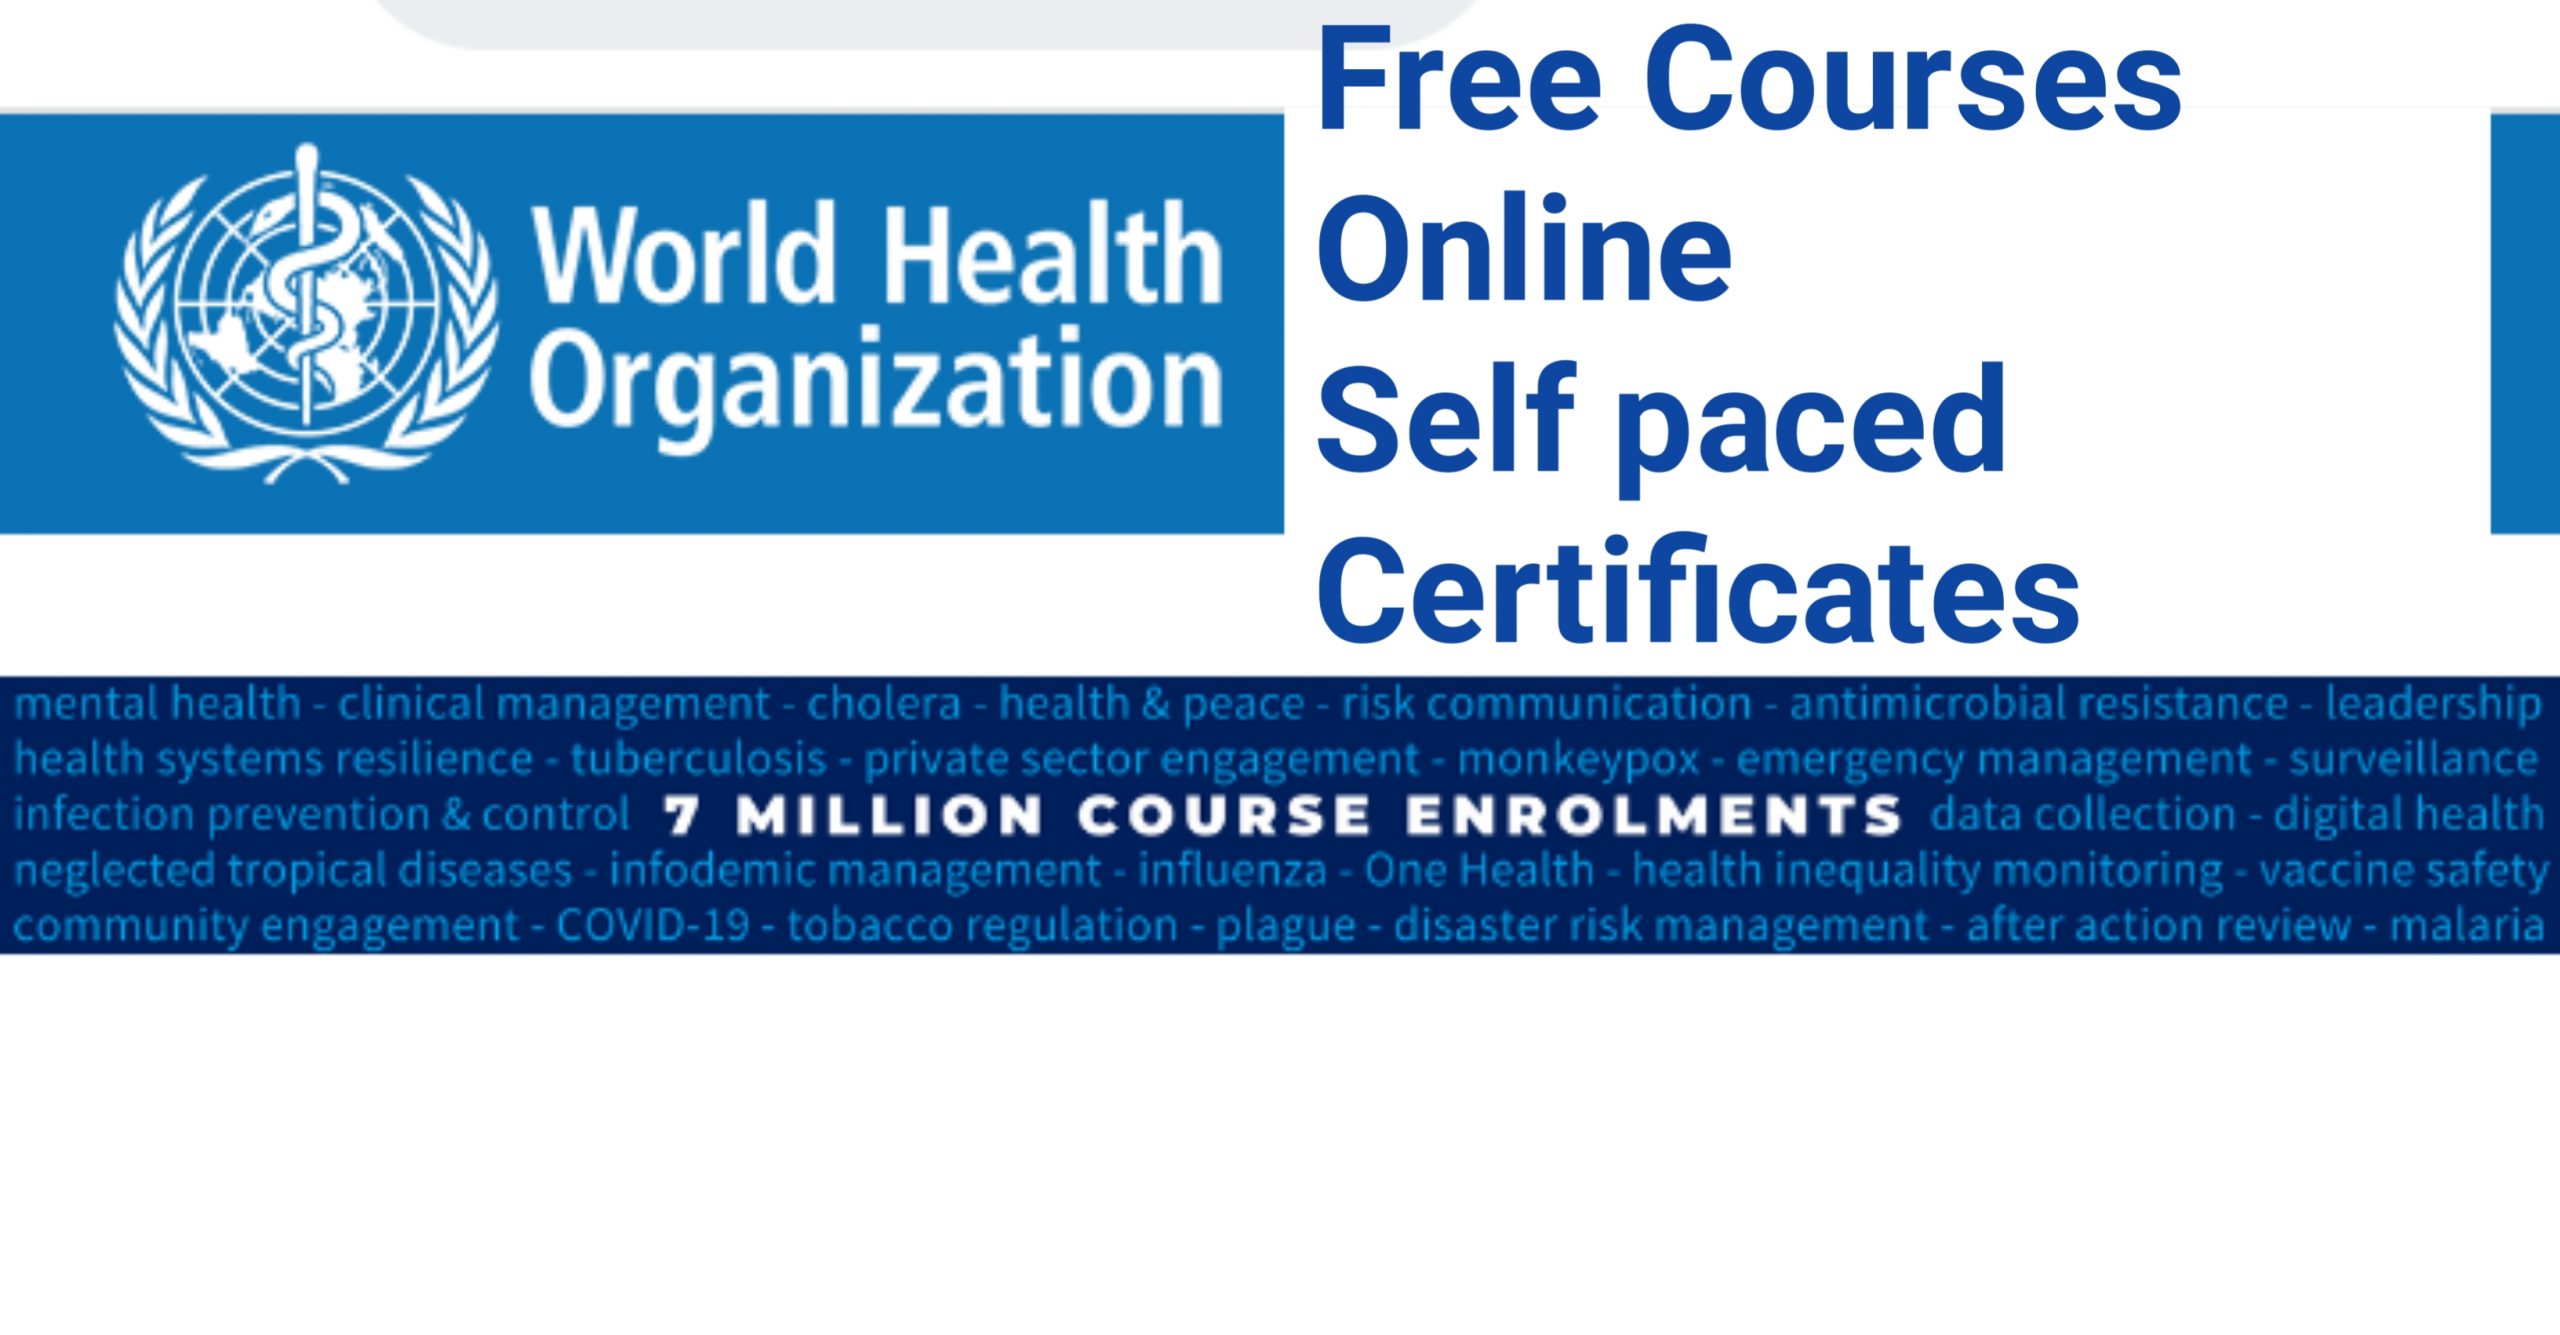 20220918 171501 scaled - World Health Organization Free online Courses (10, 000 plus) and Free Certificates